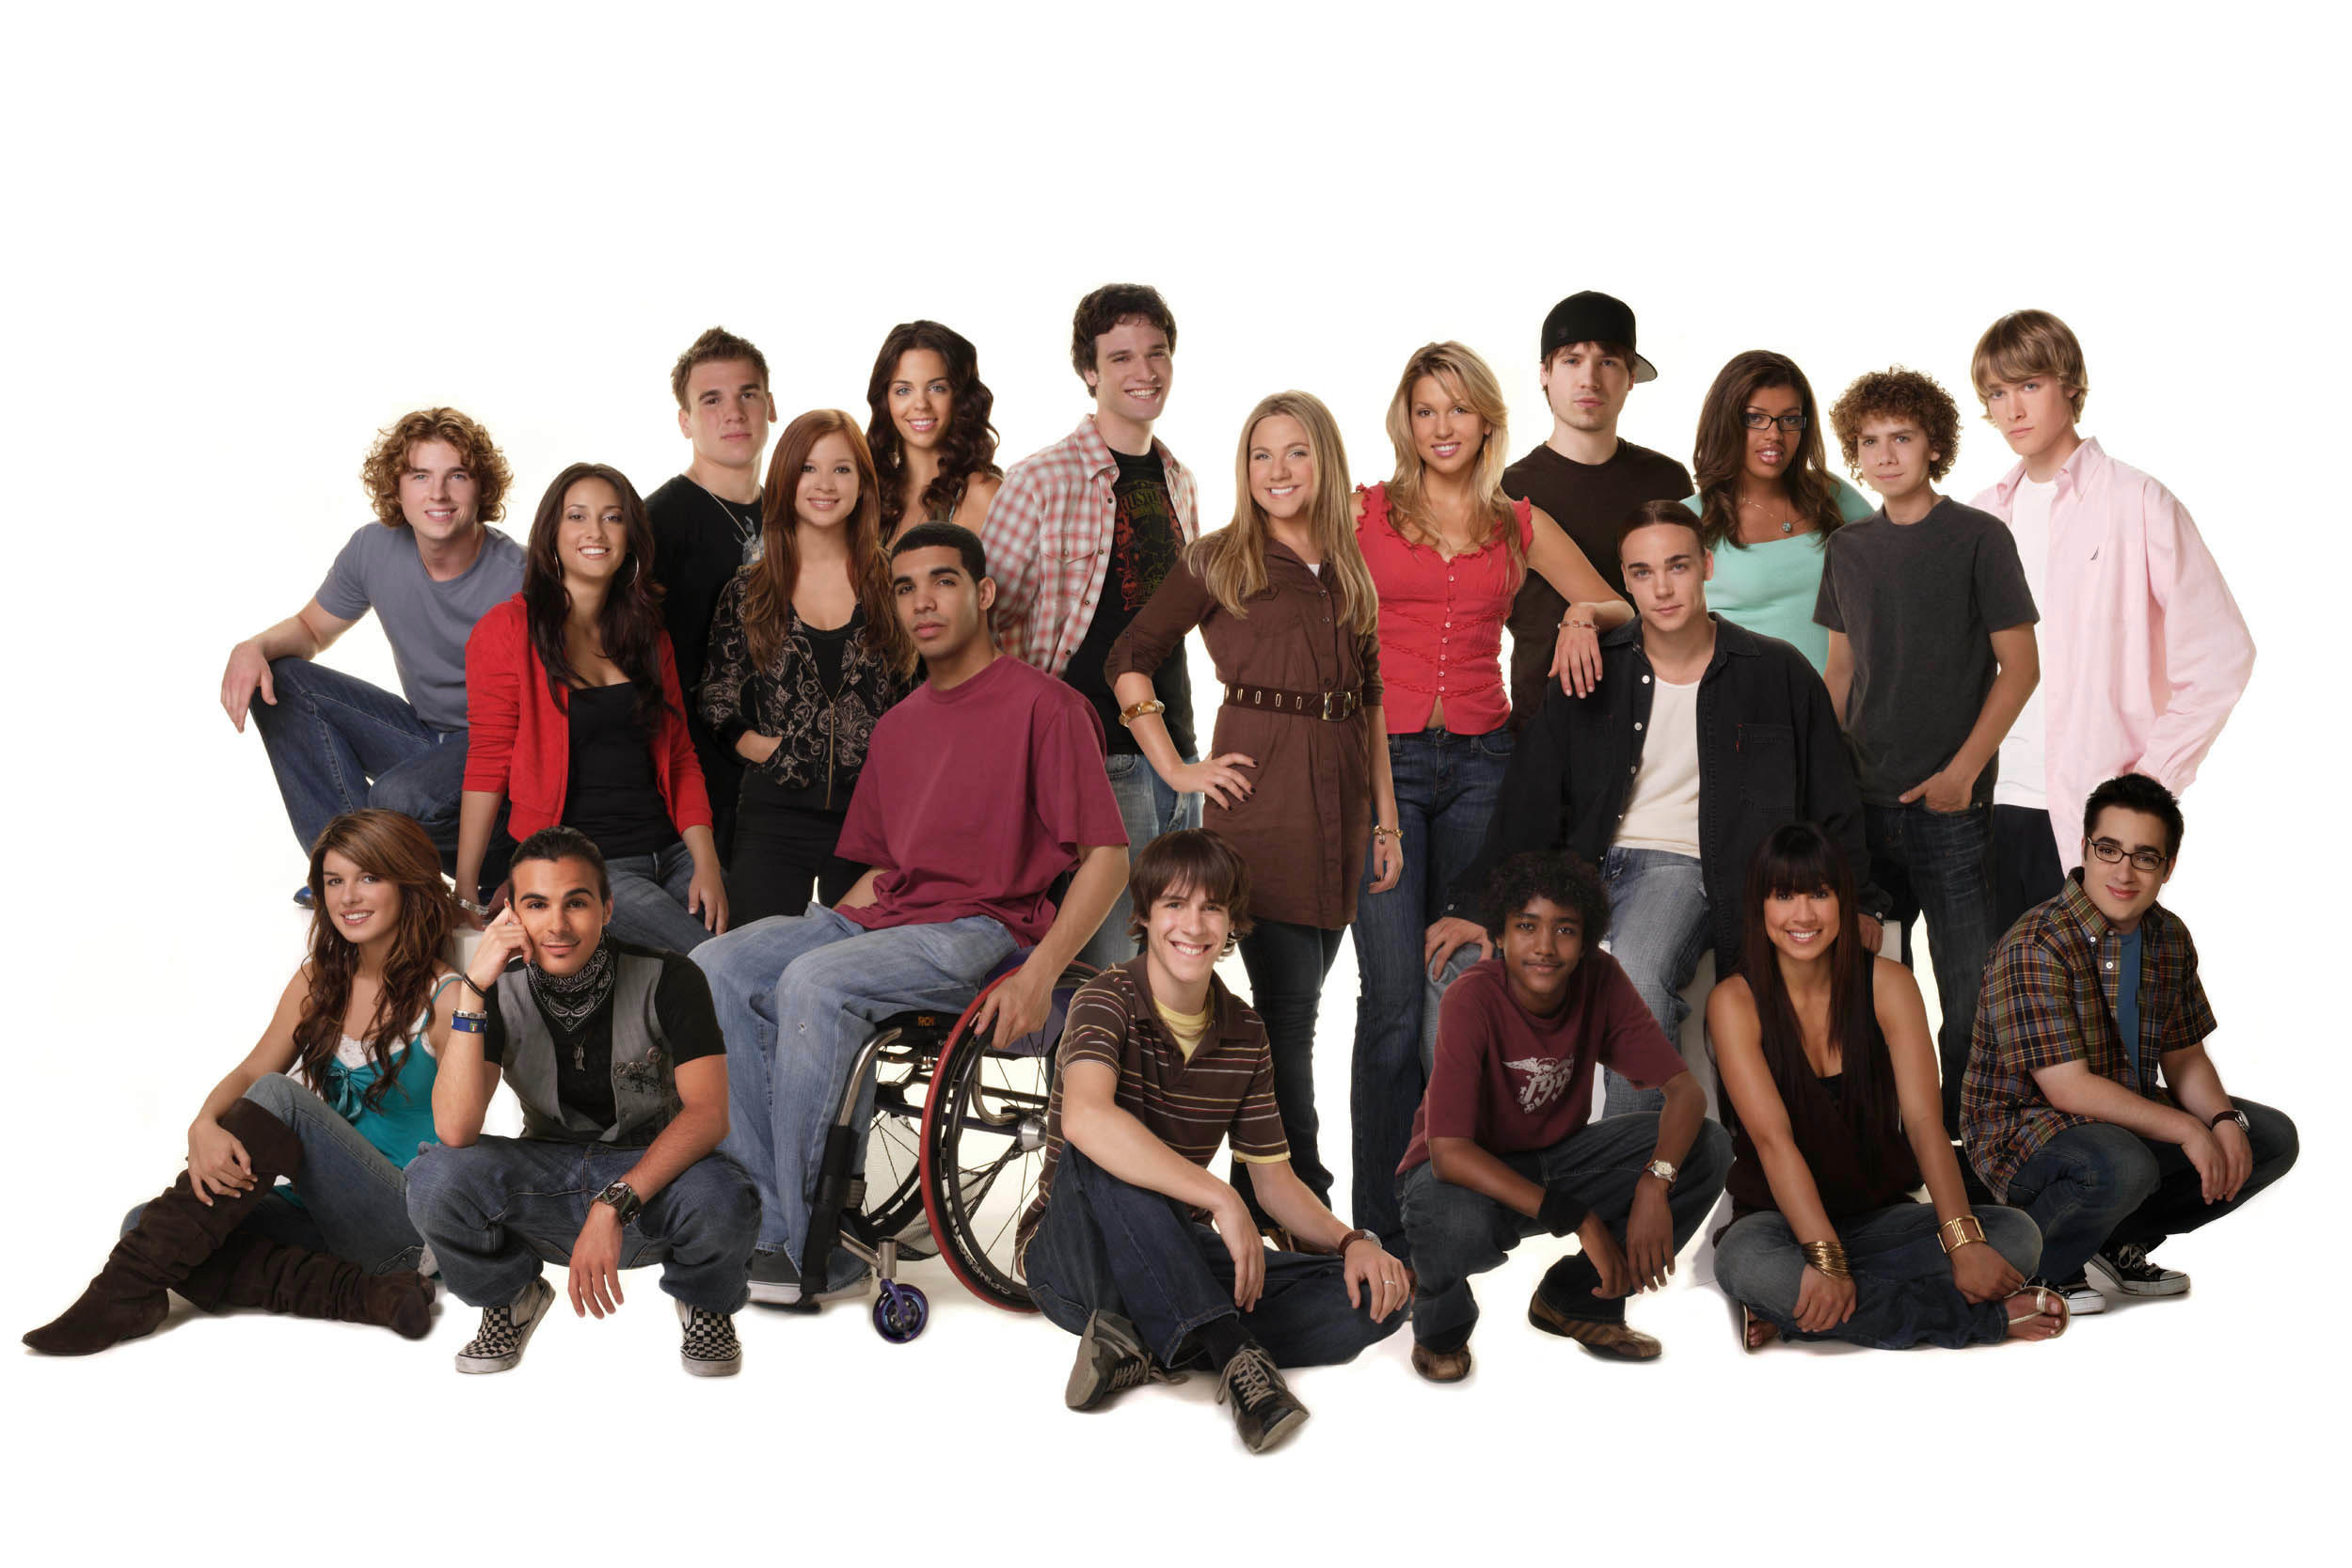 And finally...basically everyone from Skins and Degrassi. 